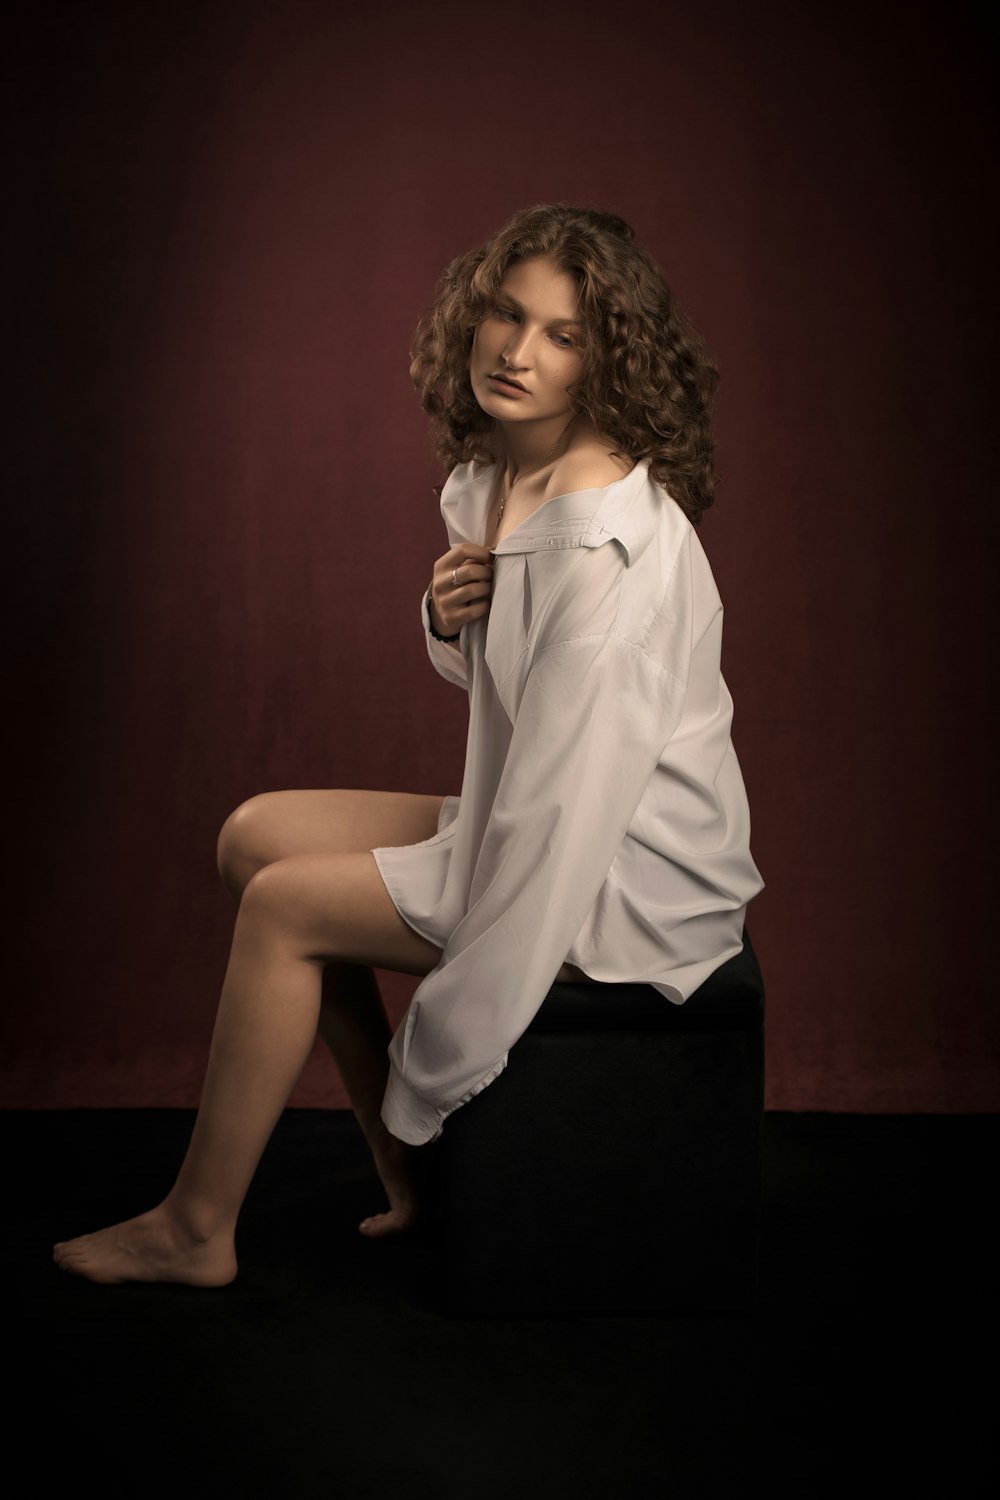 woman in white dress shirt and black skirt sitting on black chair